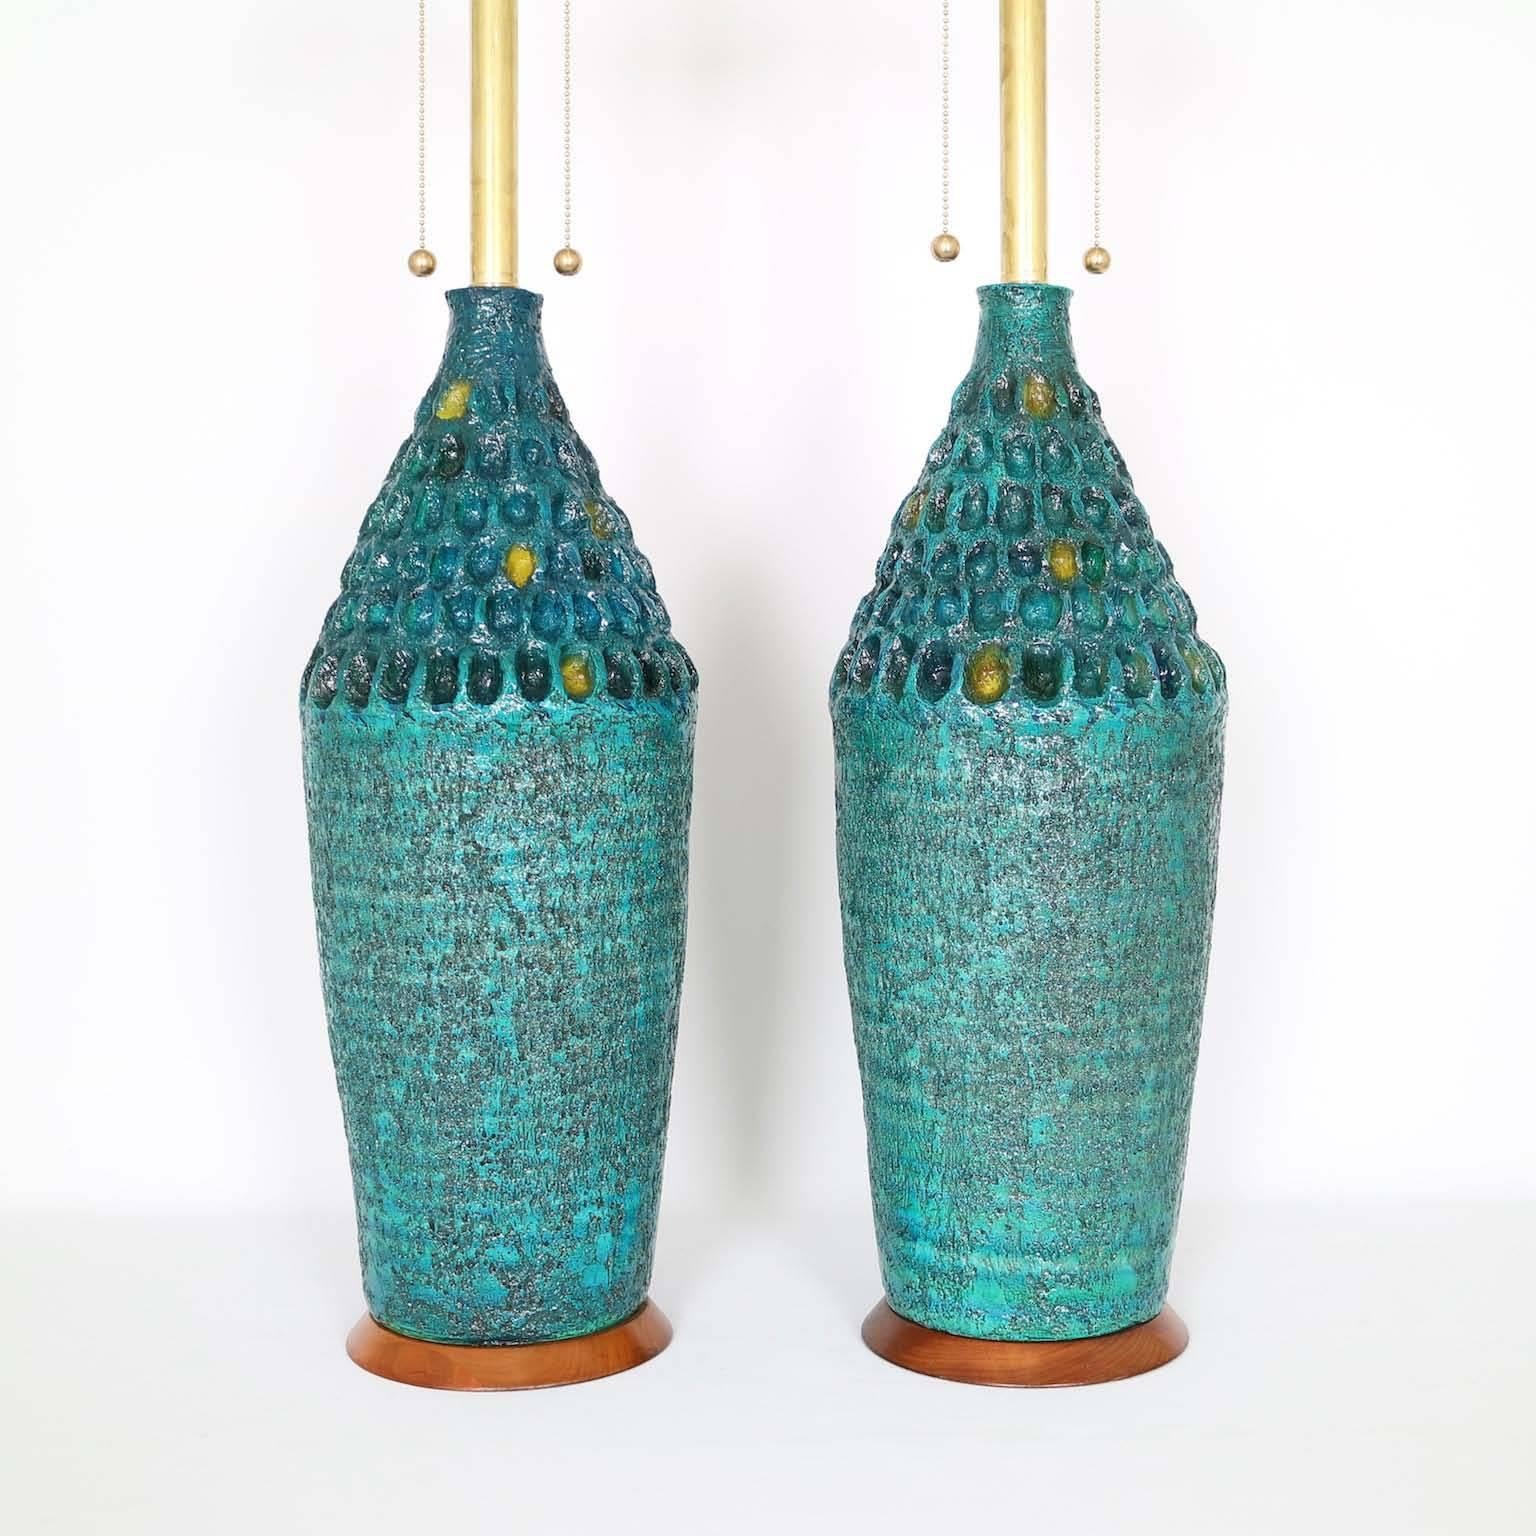 American Midcentury Pair of Brutalist Style Ceramic Lamps by Quartite Creative Corp.